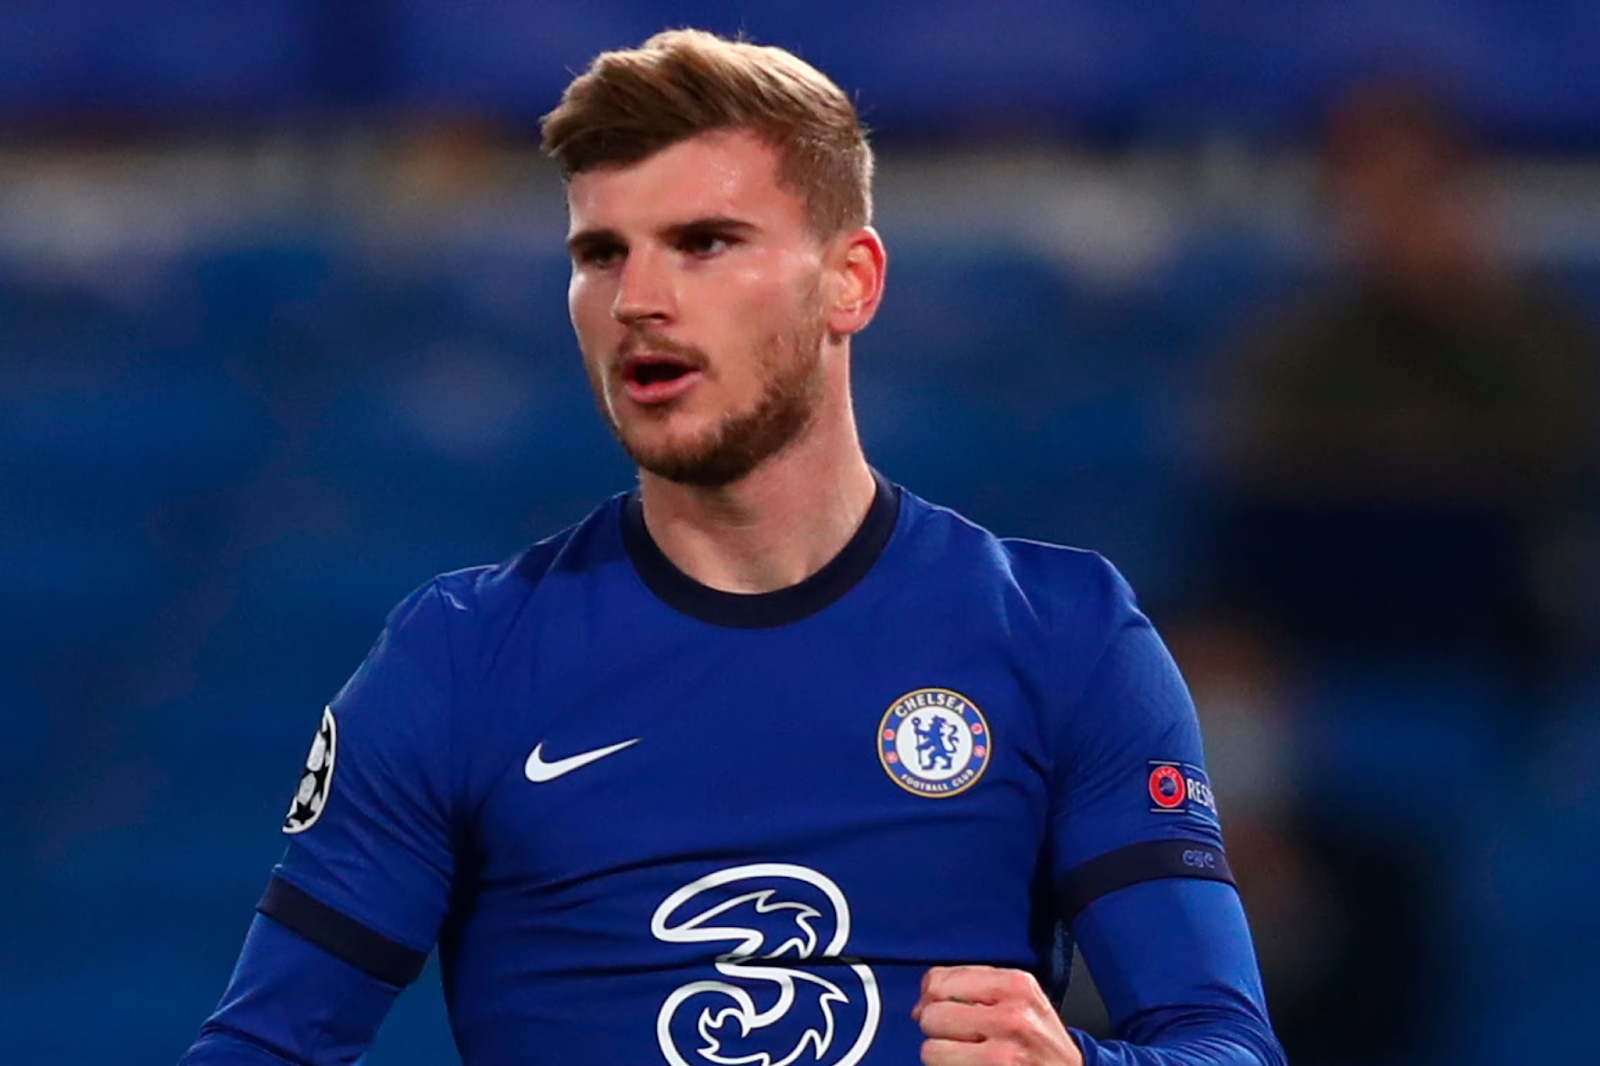 Latest overview of the playerTimo Werner